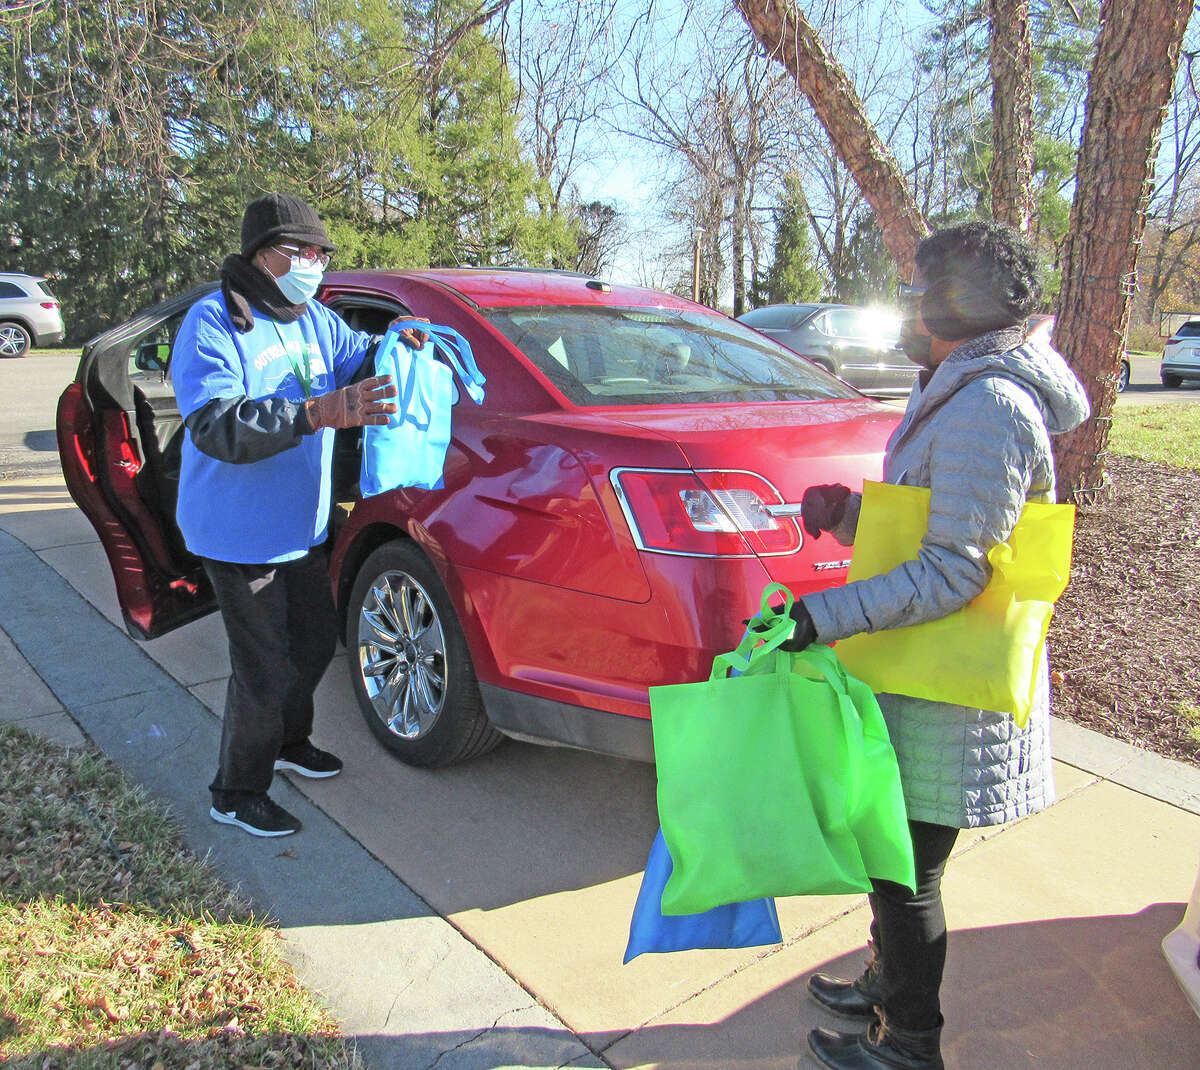 Metro Area Professional Association (MAPO) volunteers distribute items to recipients Saturday during the Metro Area Professional Association (MAPO) Holiday Shoutout Drive-By Giveaway at National Shrine of Our Lady of the Snows in Belleville.